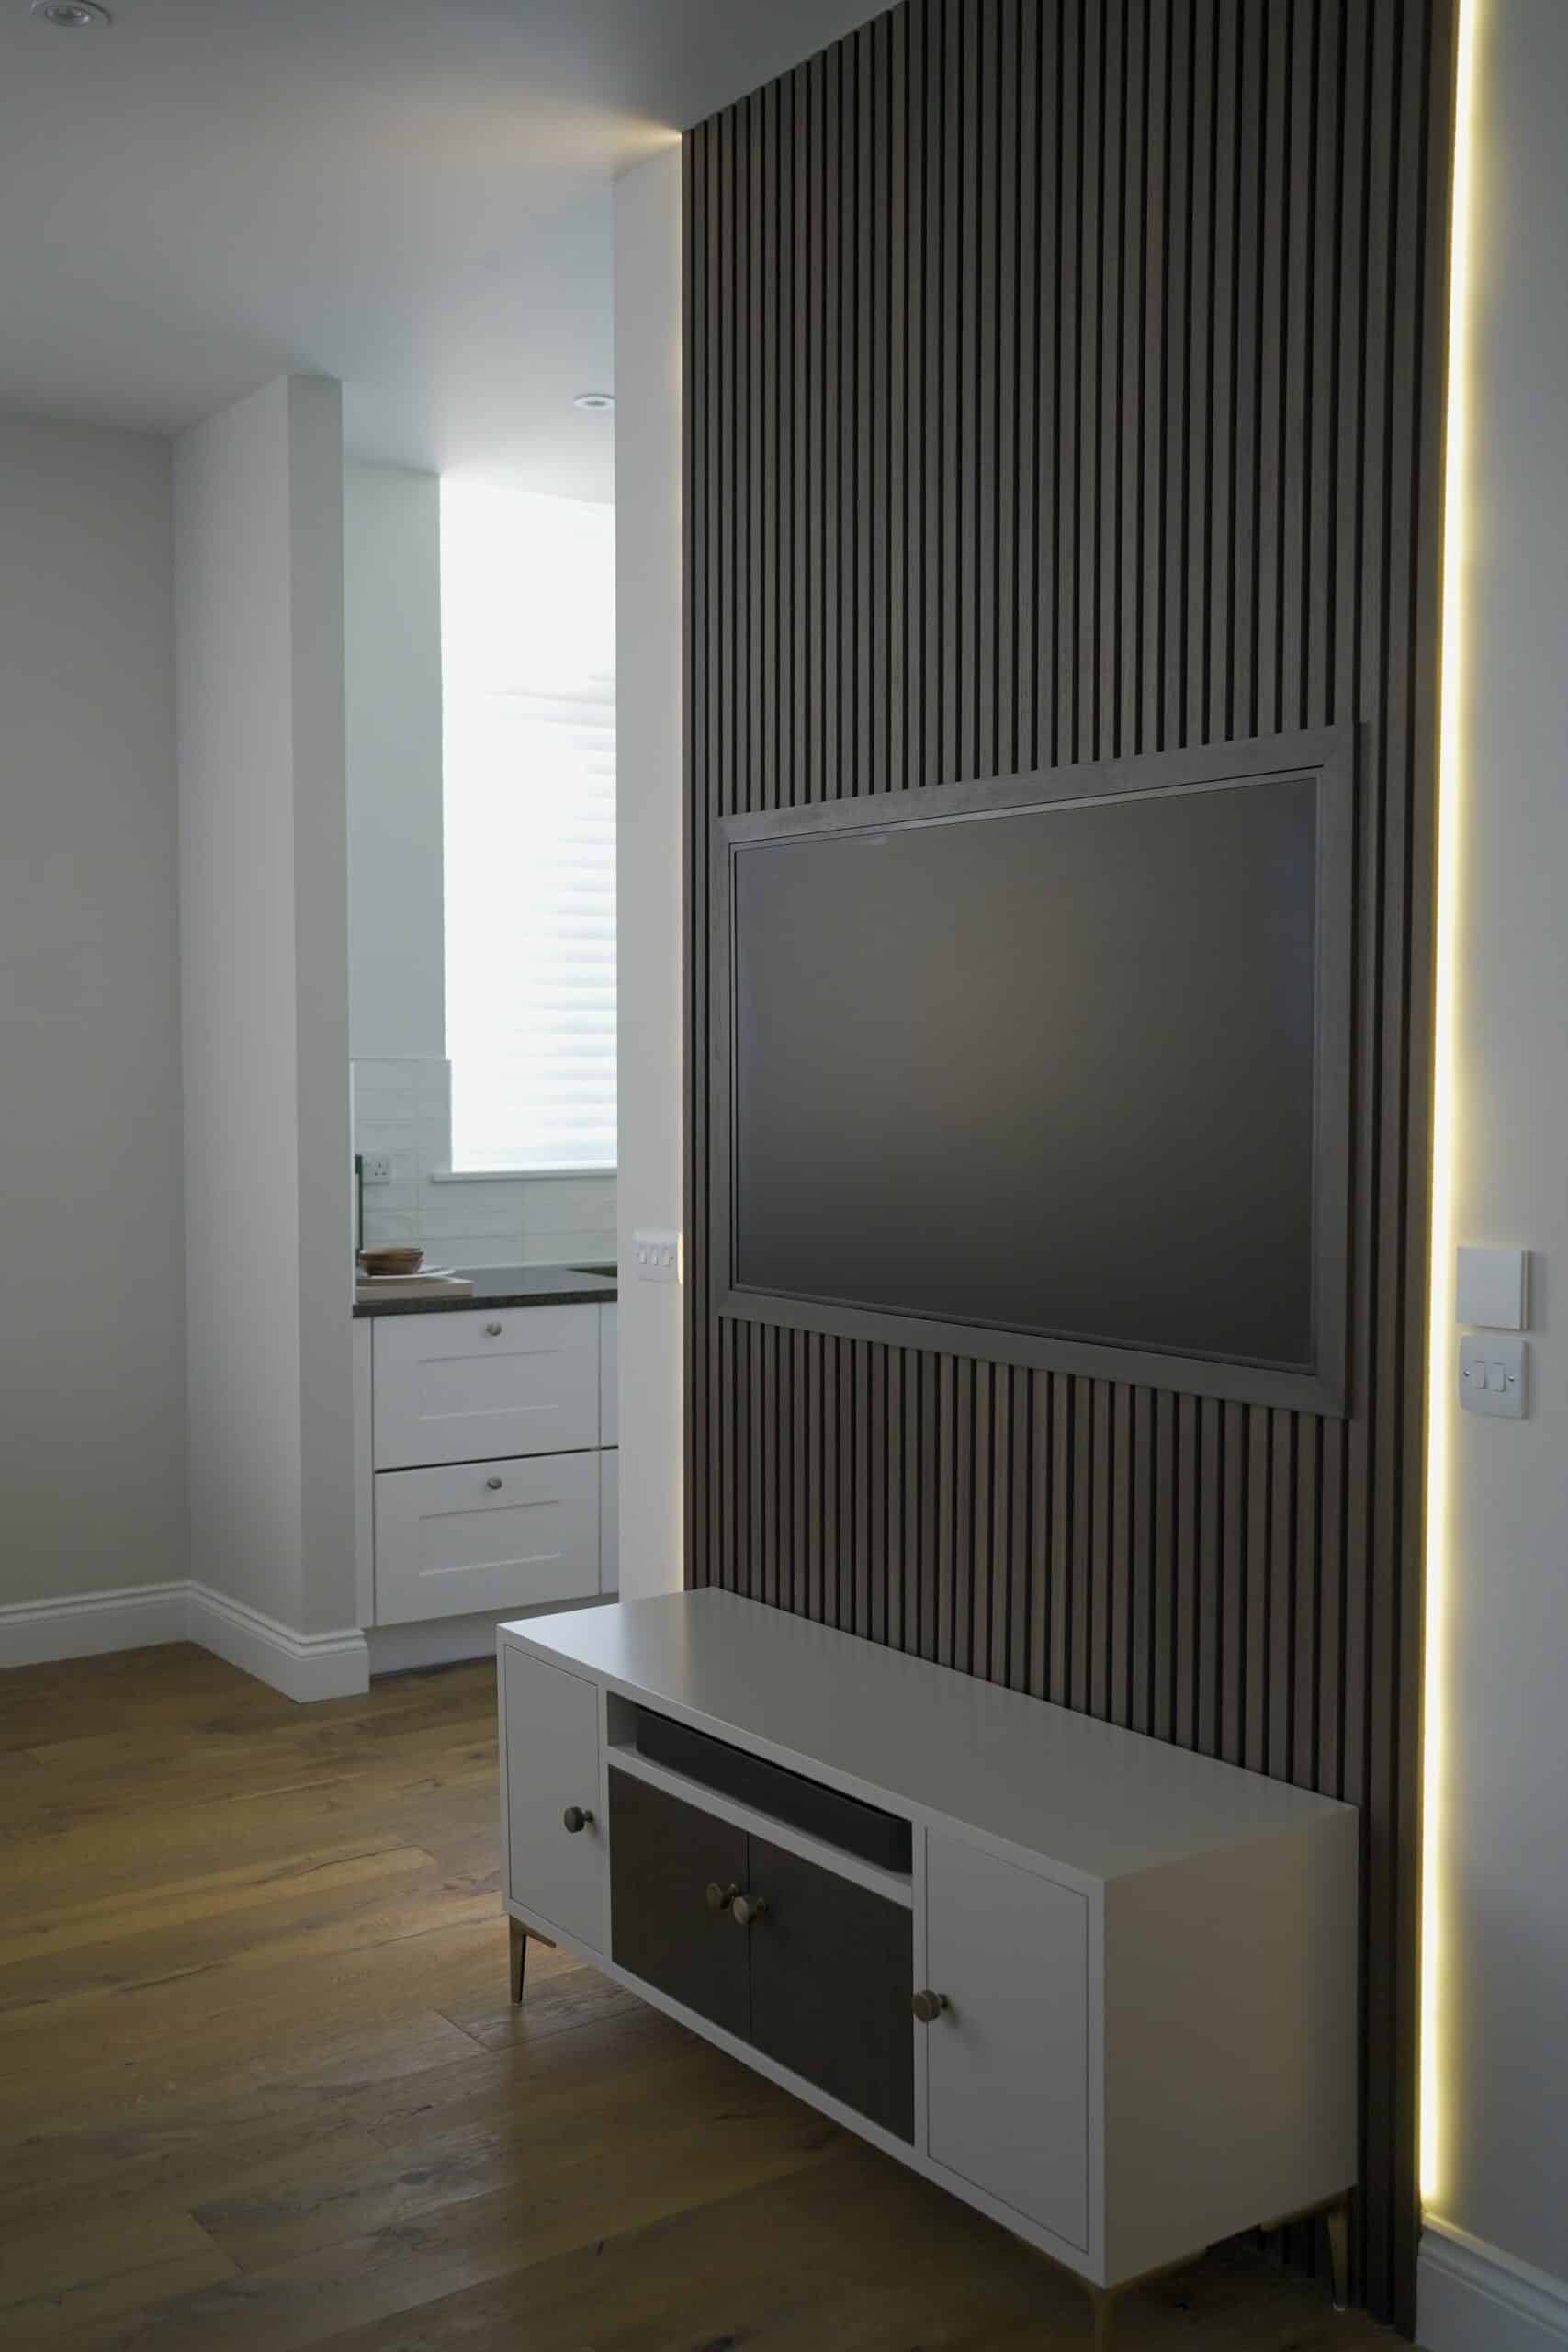 Bespoke media unit and feature wall with inset TV